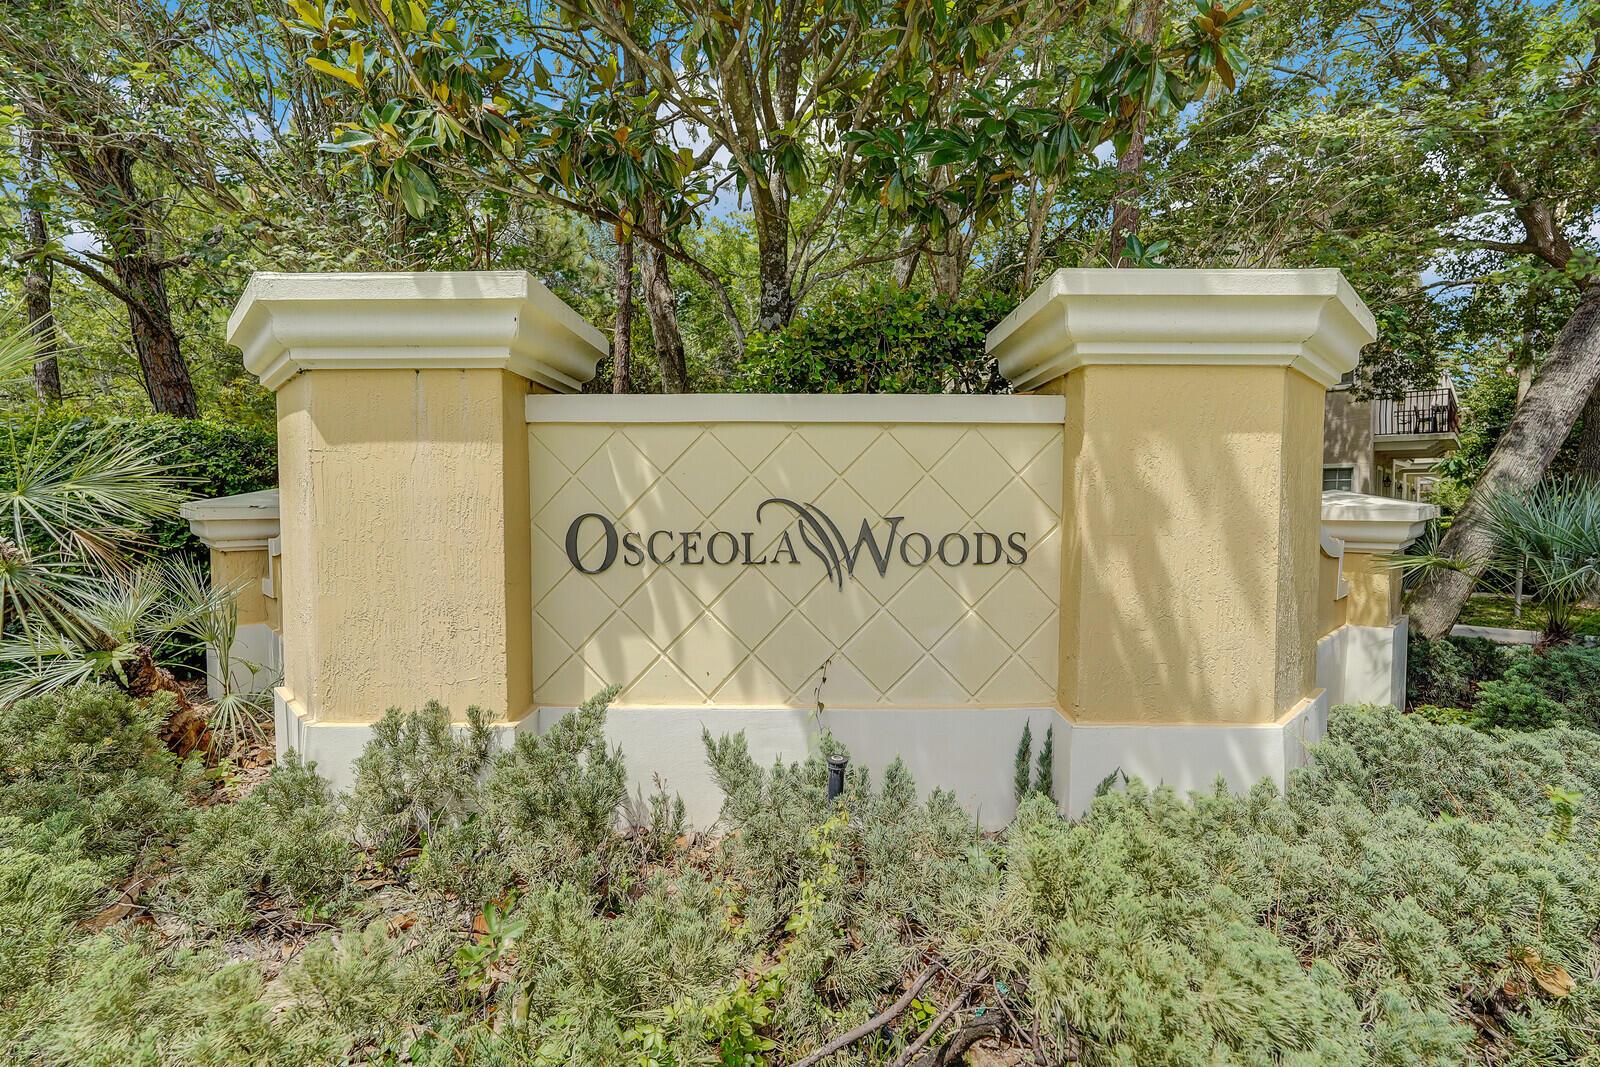 COME HOME TO OSCEOLA WOODS. CENTRALLY LOCATED ABACOA FAMILY AND PET FRIENDLY COMMUNITY THIS SPACIOUS 1,998 SQ. FT. 3 BEDROOM ,DEN ,31/2 BATH TOWNHOME FEATURES A LARGE 2 CAR GARAGE  .JUST 3 BLOCKS FROM ROGER DEAN STADIUM   WATCH THE SUMMER WEEKLY FIREWORKS FROM EITHER OF YOUR PRIVATE BALCONIES..THIS SPACIOUS HOME BOASTS  NEWER RANGE , REFRIGERATOR ,WASHER & DRYER  ,DISPOSAL & ELECTRIC H2O HEATER-FLORIDA ATLANTIC UNIVERSITY , UNIVERSITY OF FLORIDA   AND MAX PLANCK  RESEARCH INSTITUTES ARE ALL WALKABL,E DESTINATIONS & ALL THE RESTAURANTS AND ATTRACTIONS OF DOWNTOWN ABACOA..  ALTON TOWN CENTER A  A 5 MINUTE DRIVE ... THIS LOVELY HOME WILL HAVE A BRAND NEW ROOF INSTALLED IN AUGUST WITH ASSESSMENT 100% PD BY CURRENT OWNER  COME VIEW THIS PREMIUM HOME AND YOUR SEARCH WILL BE COMPLETE